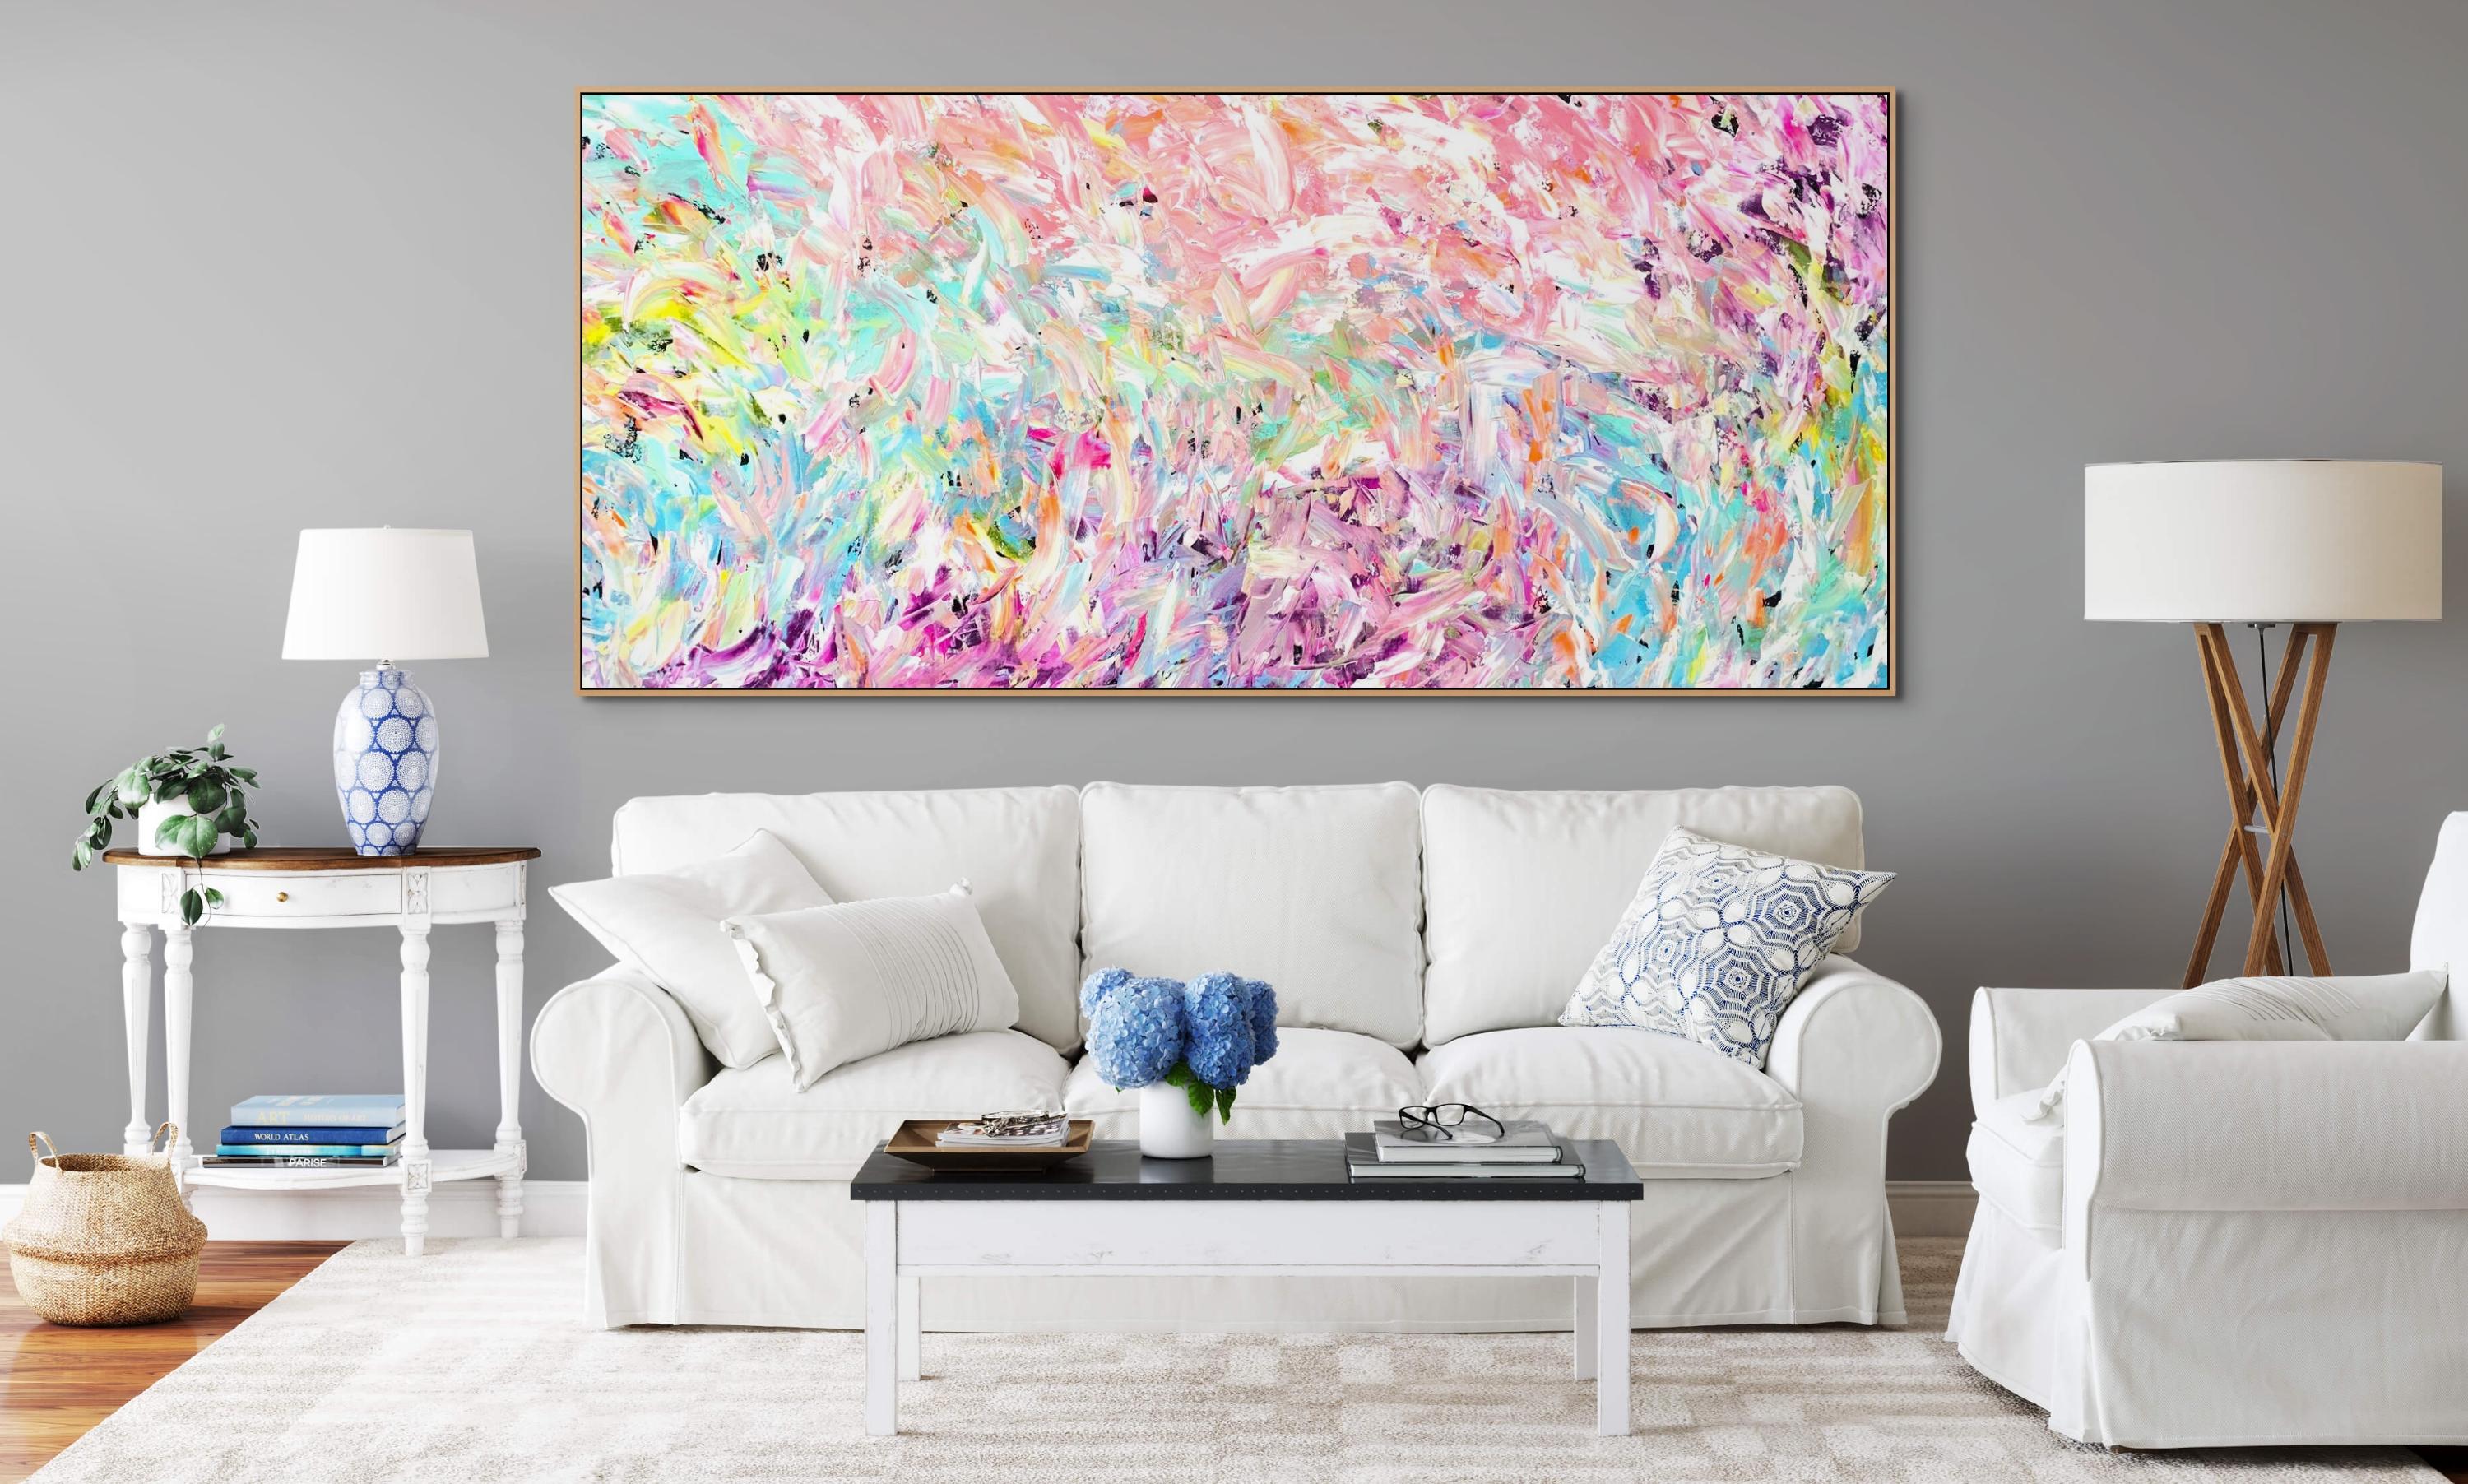 Pastel Seduction - Abstract Expressionist Painting by Estelle Asmodelle